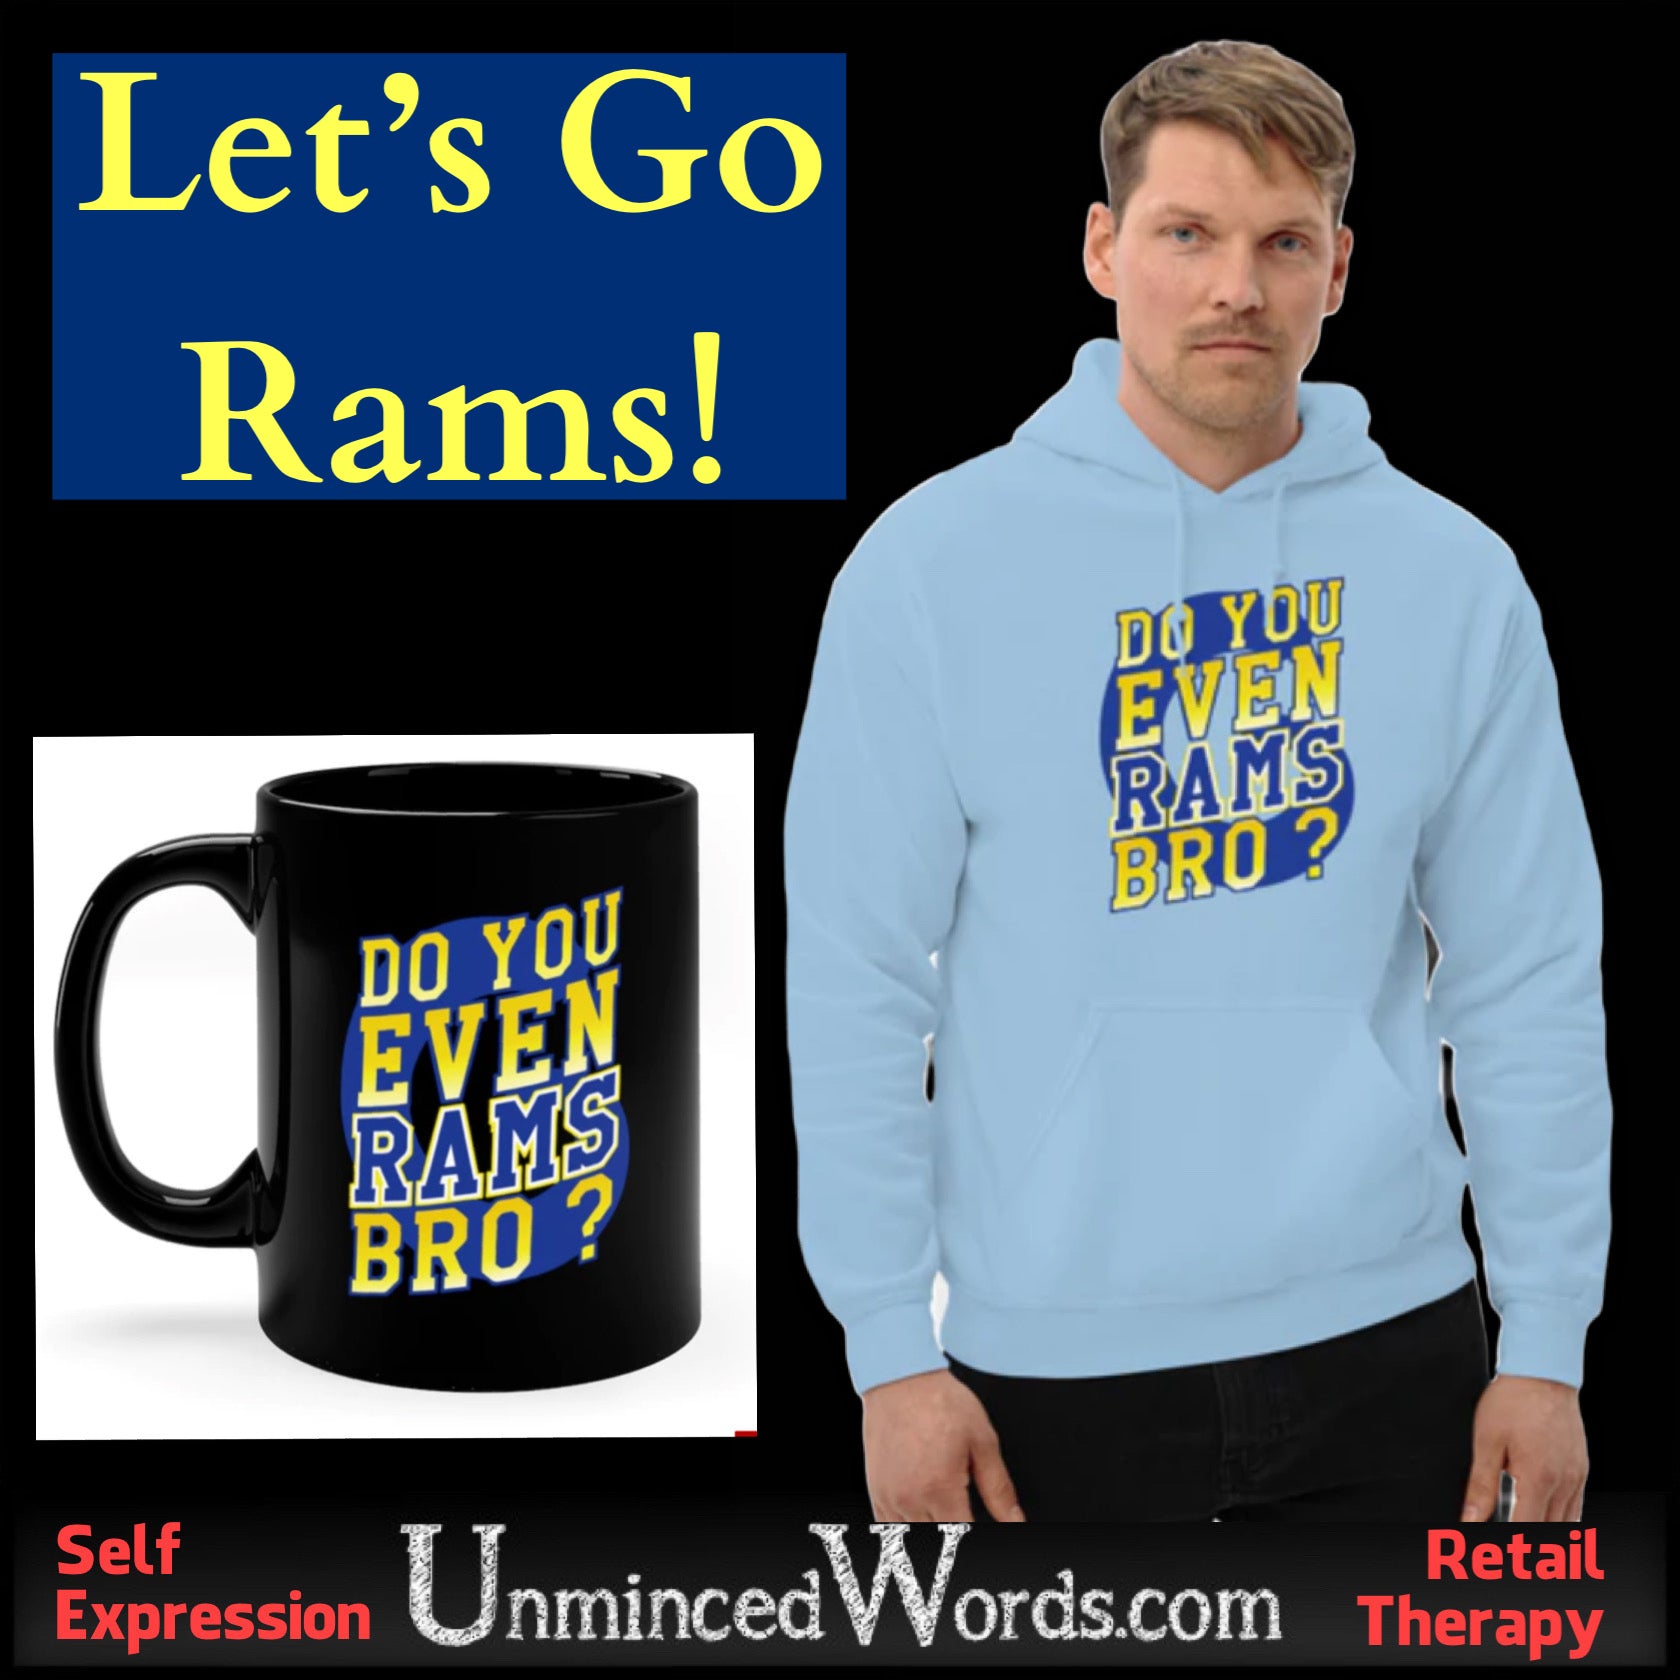 Show your Rams love